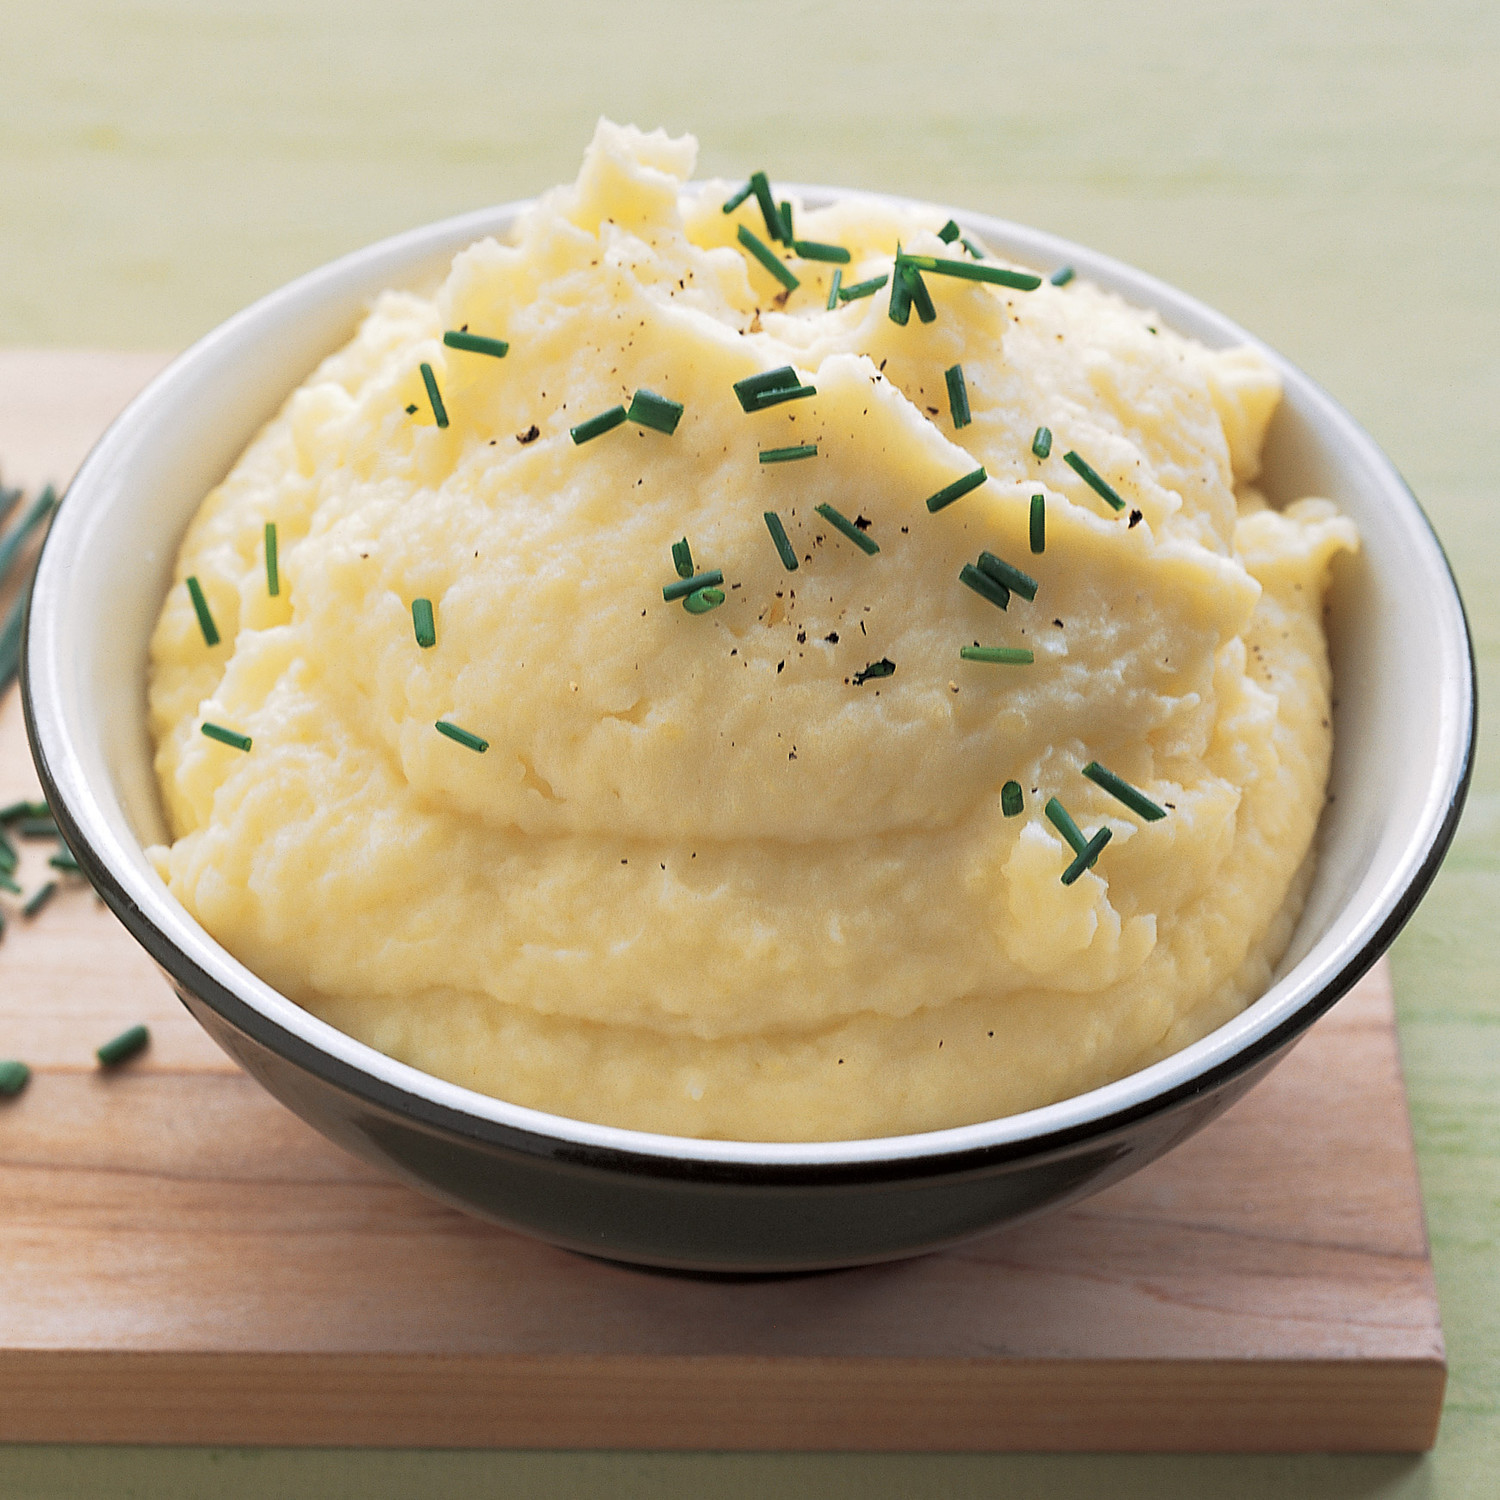 Mashed Potatoes Recipe For Thanksgiving
 Buttermilk Mashed Potatoes